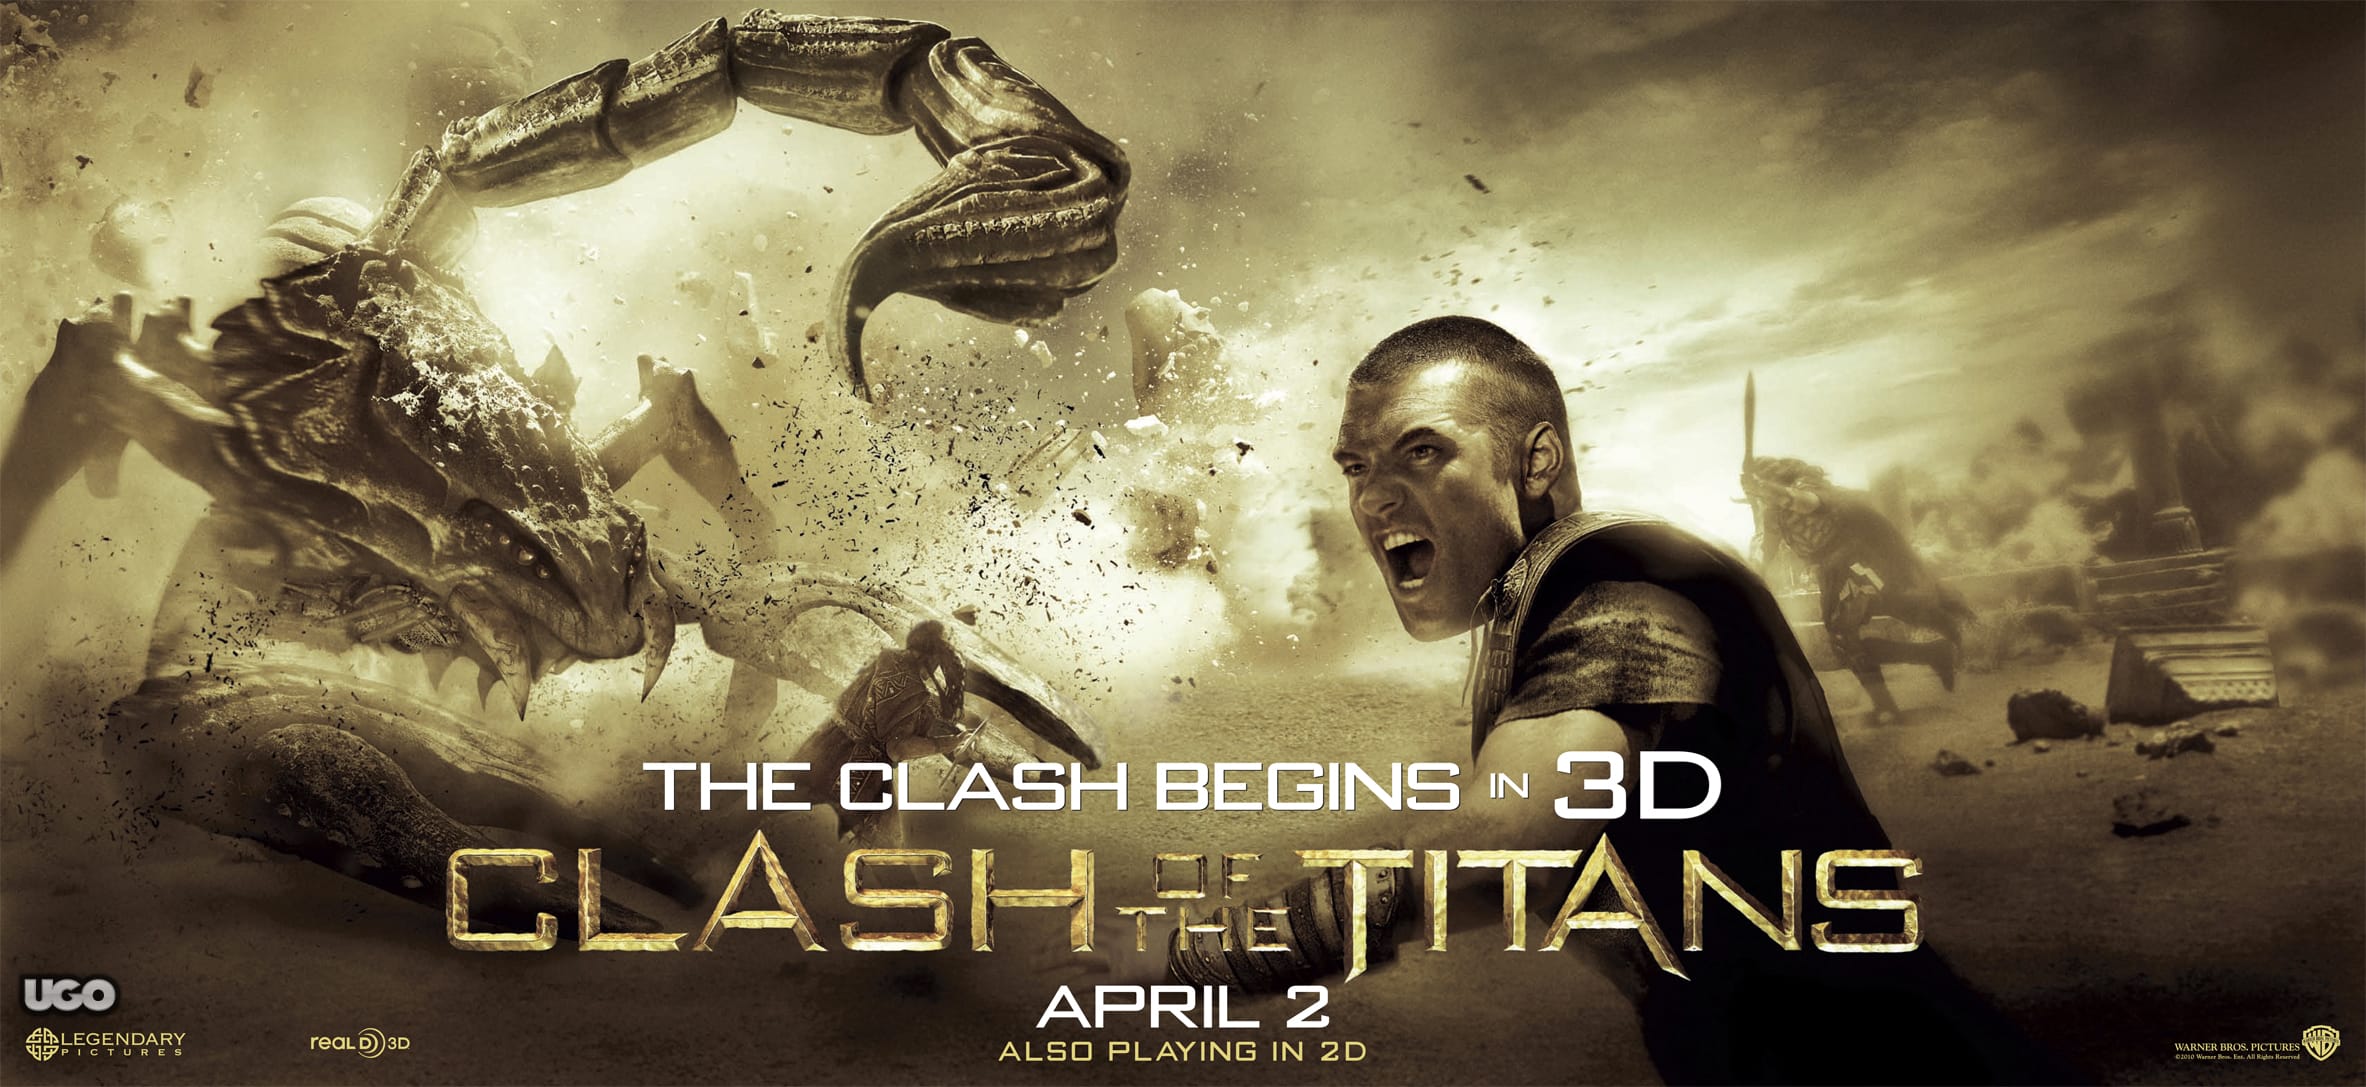 GUEST MOVIE REVIEW: Clash of the Titans (2010)